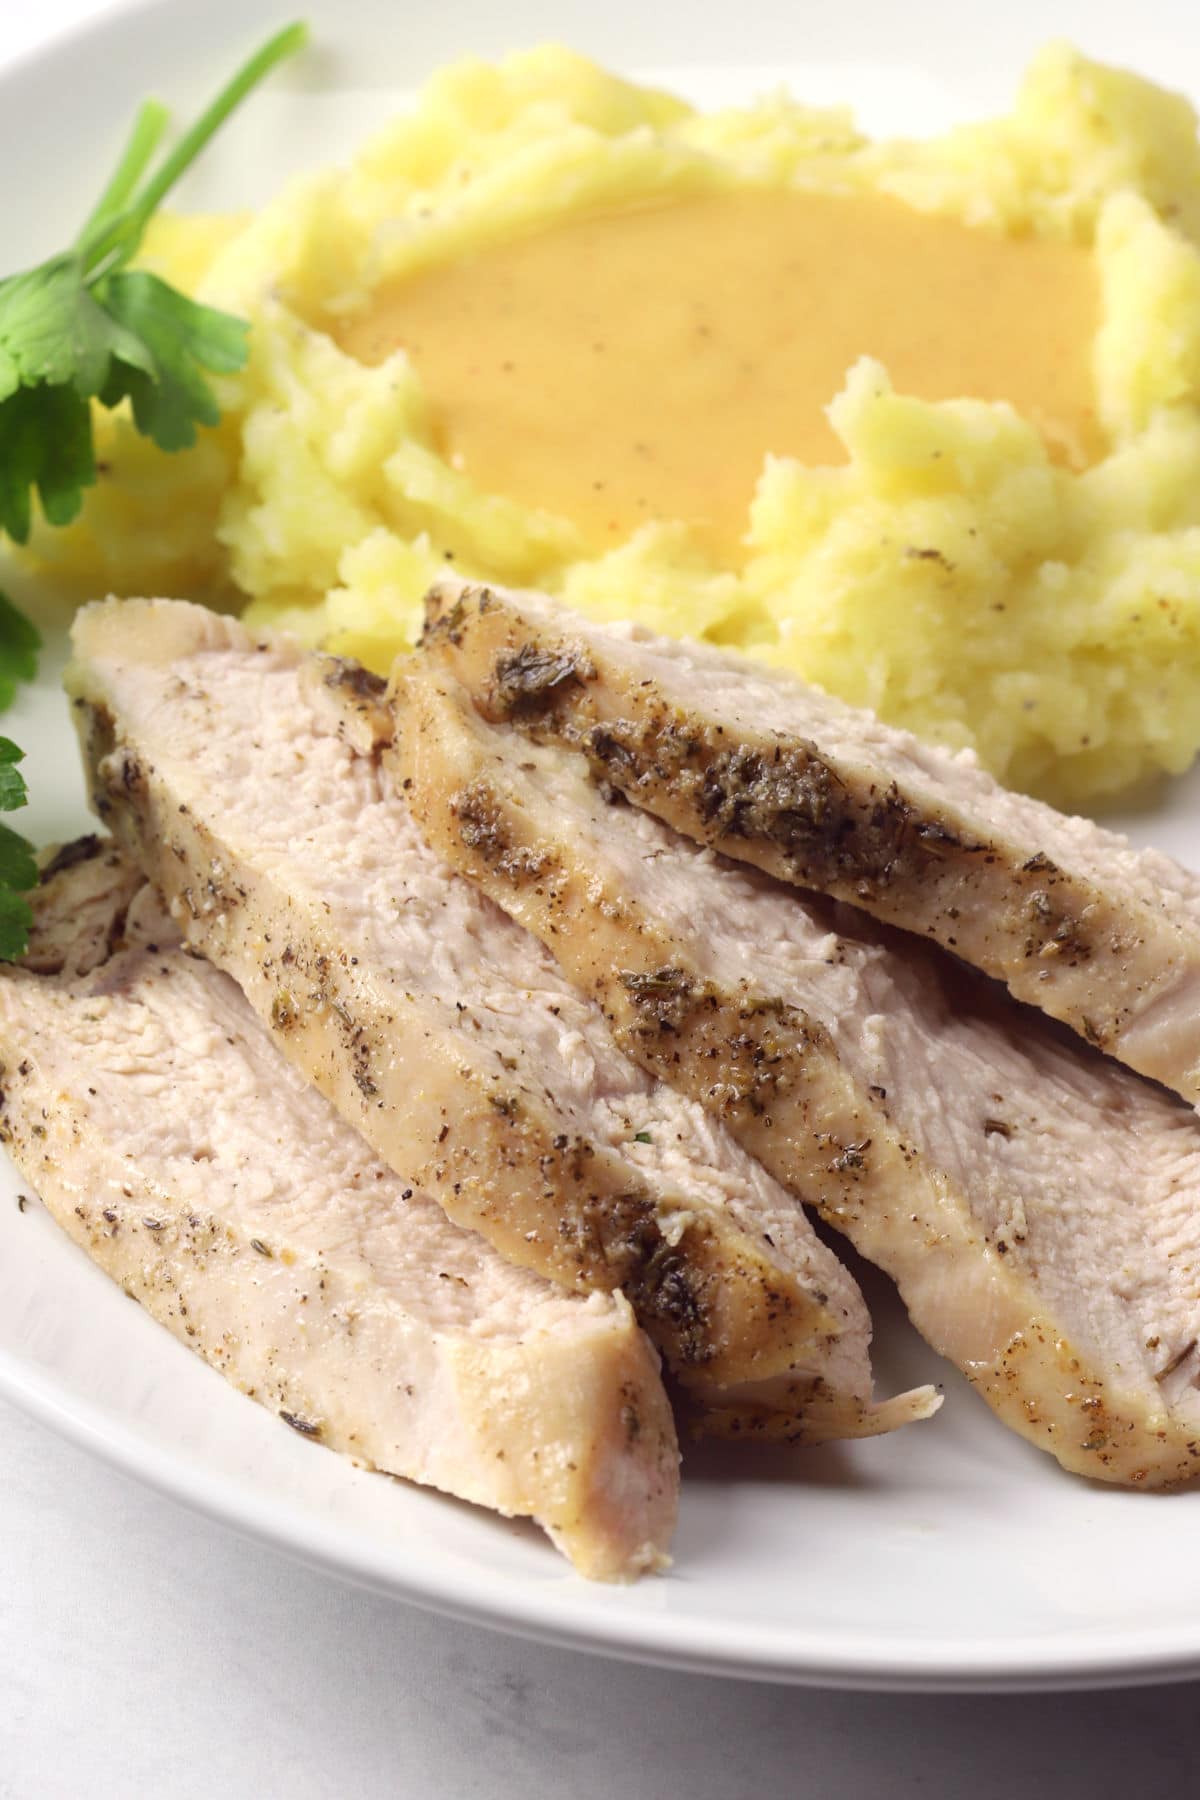 Slices of roasted turkey on a plate next to mashed potatoes.